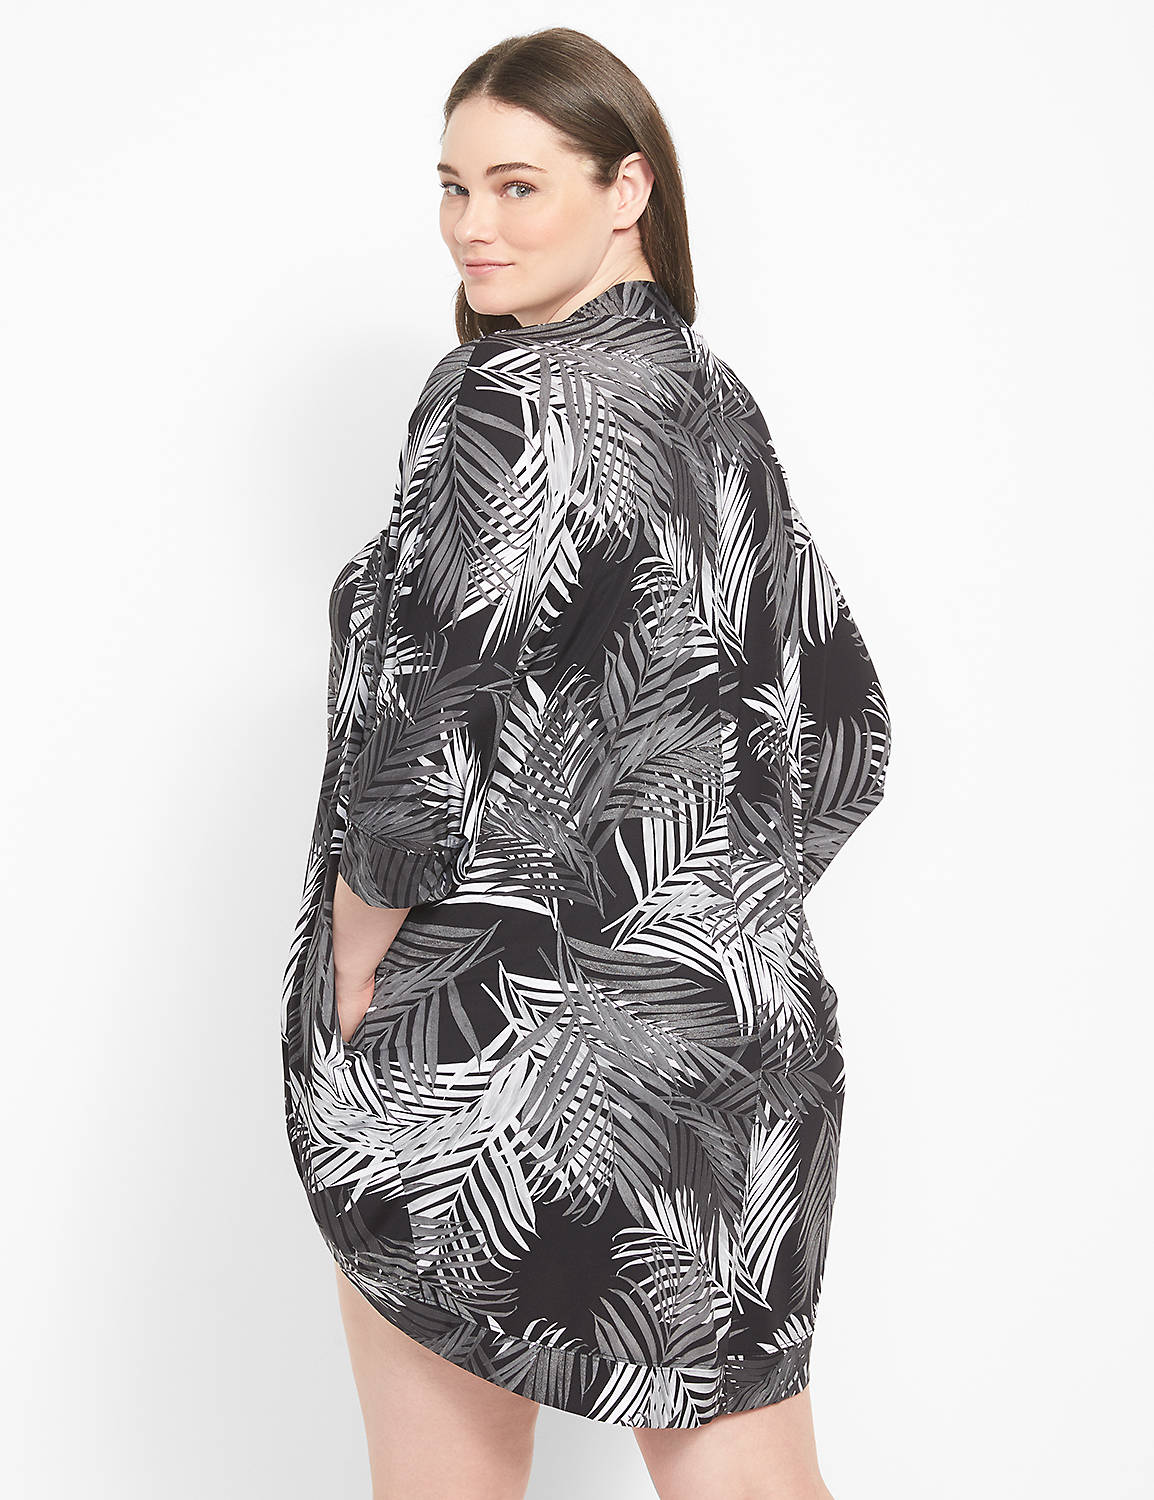 DreamyCool Cocoon Robe 1127935 Product Image 2